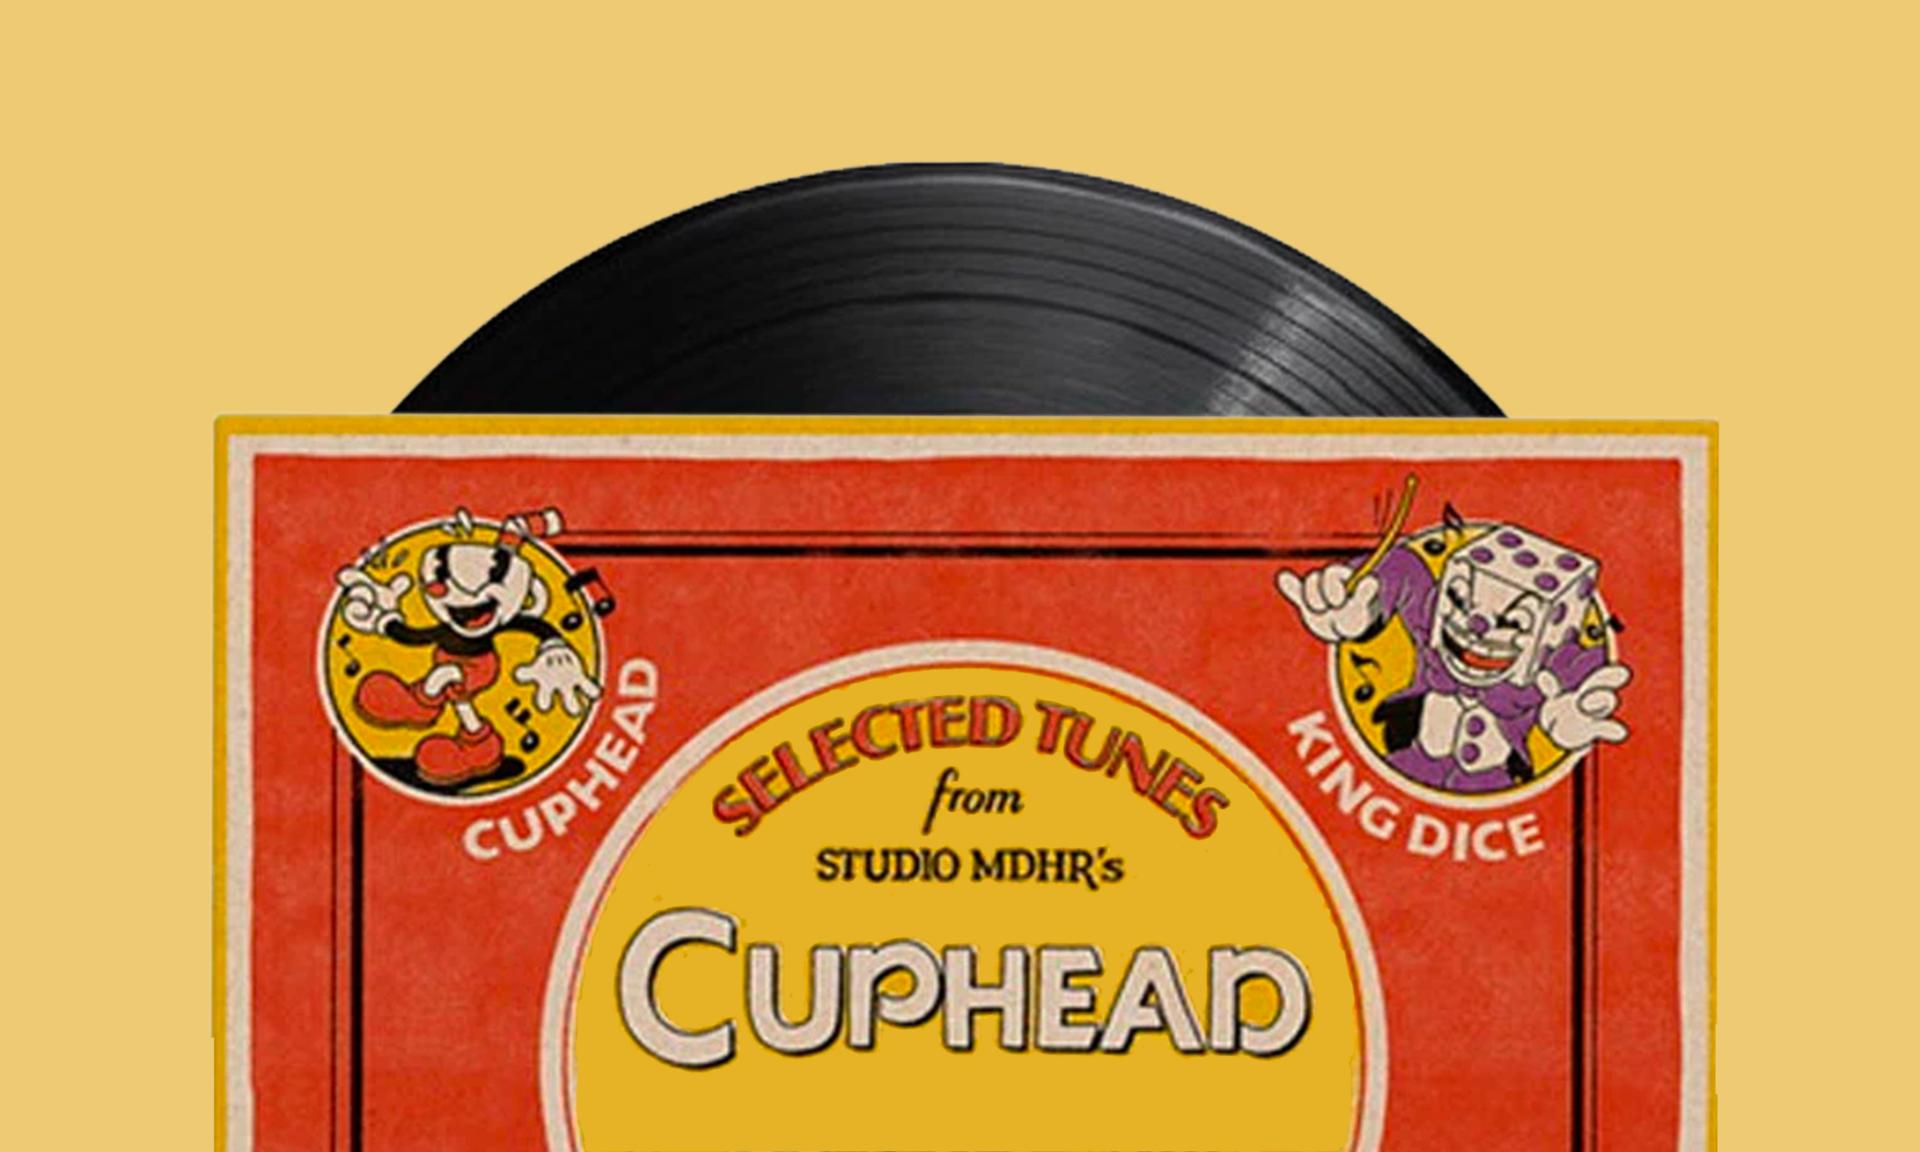 The music of Cuphead.